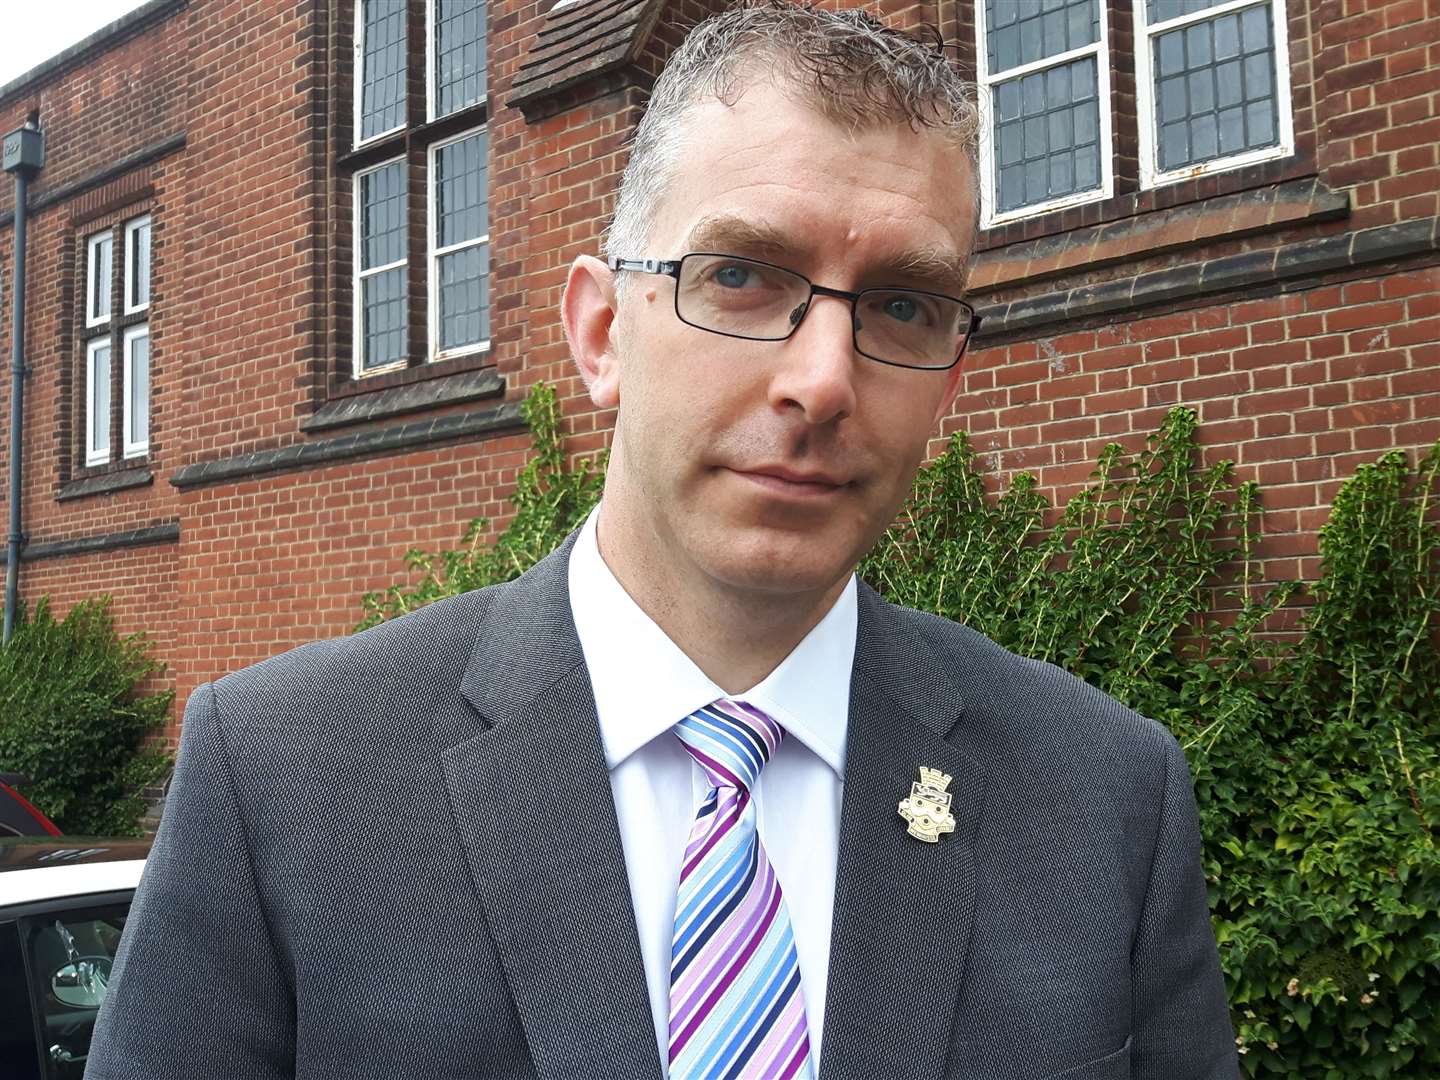 Mark Tomkins, head of MGS, said the aftermath of the incident has been "distressing"